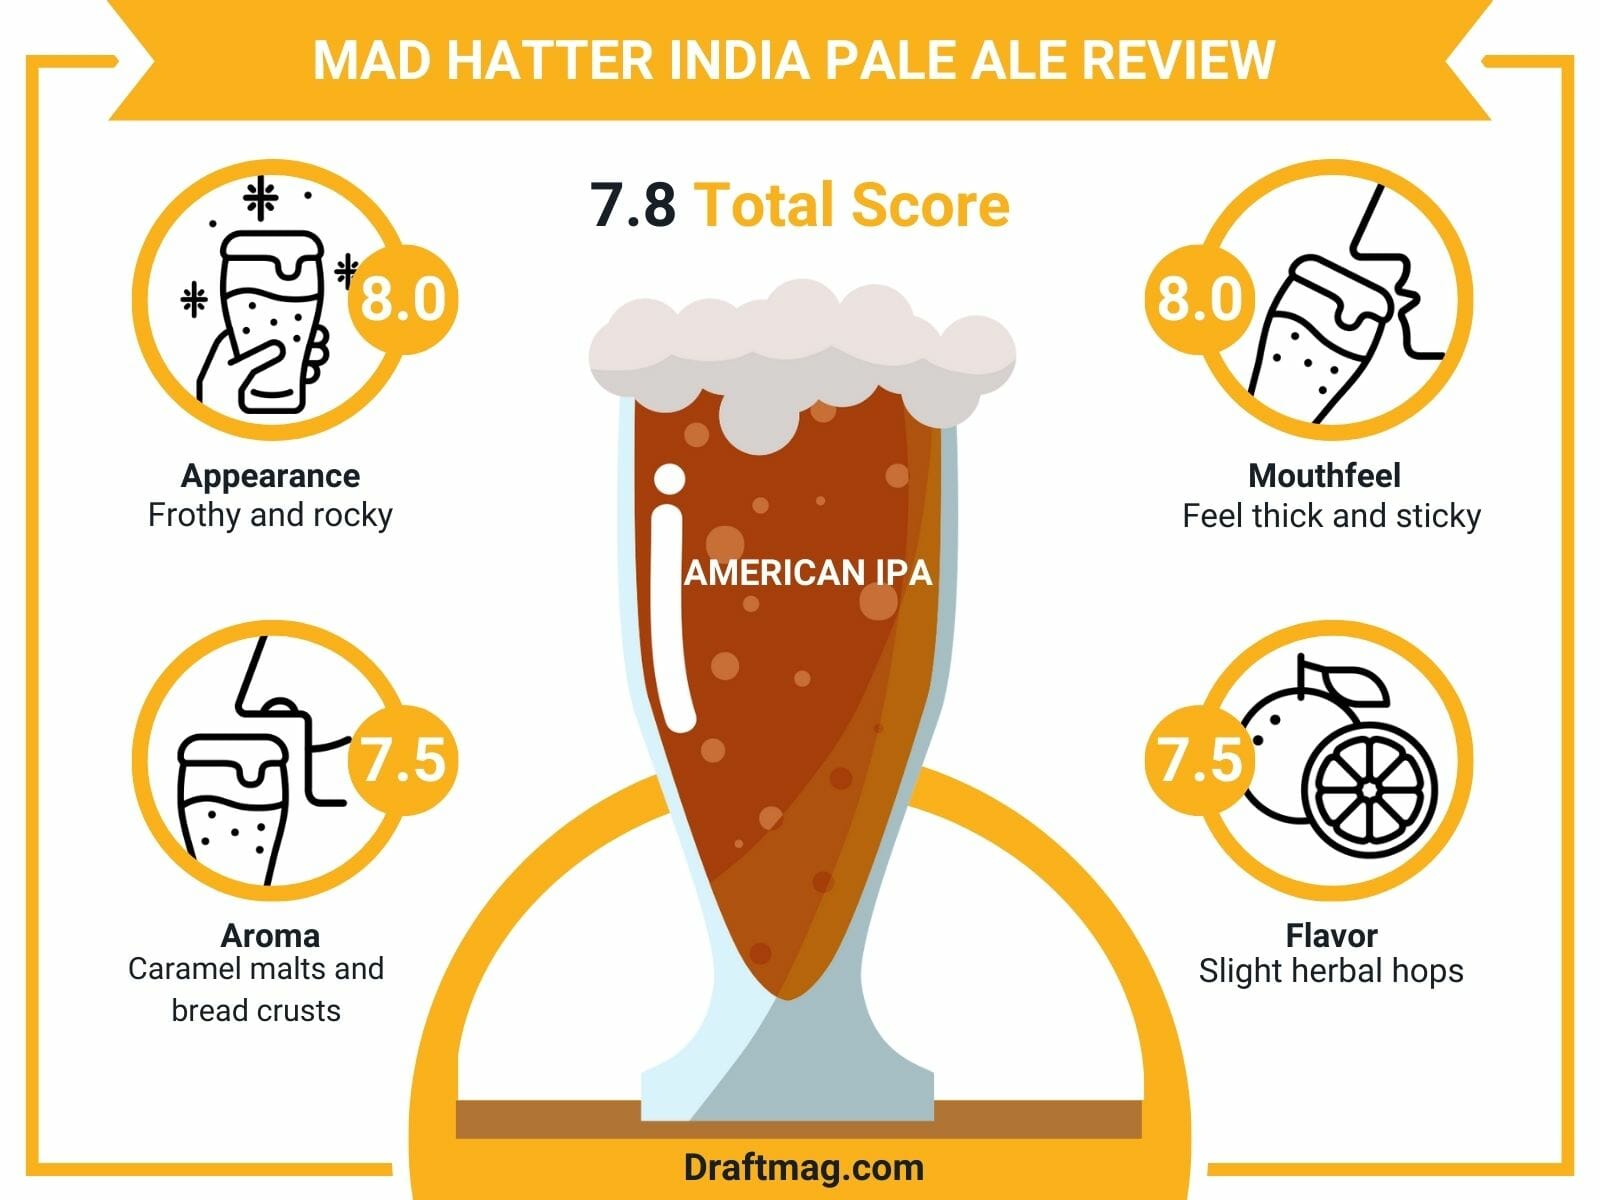 Mad Hatter India Pale Ale Review Infographic